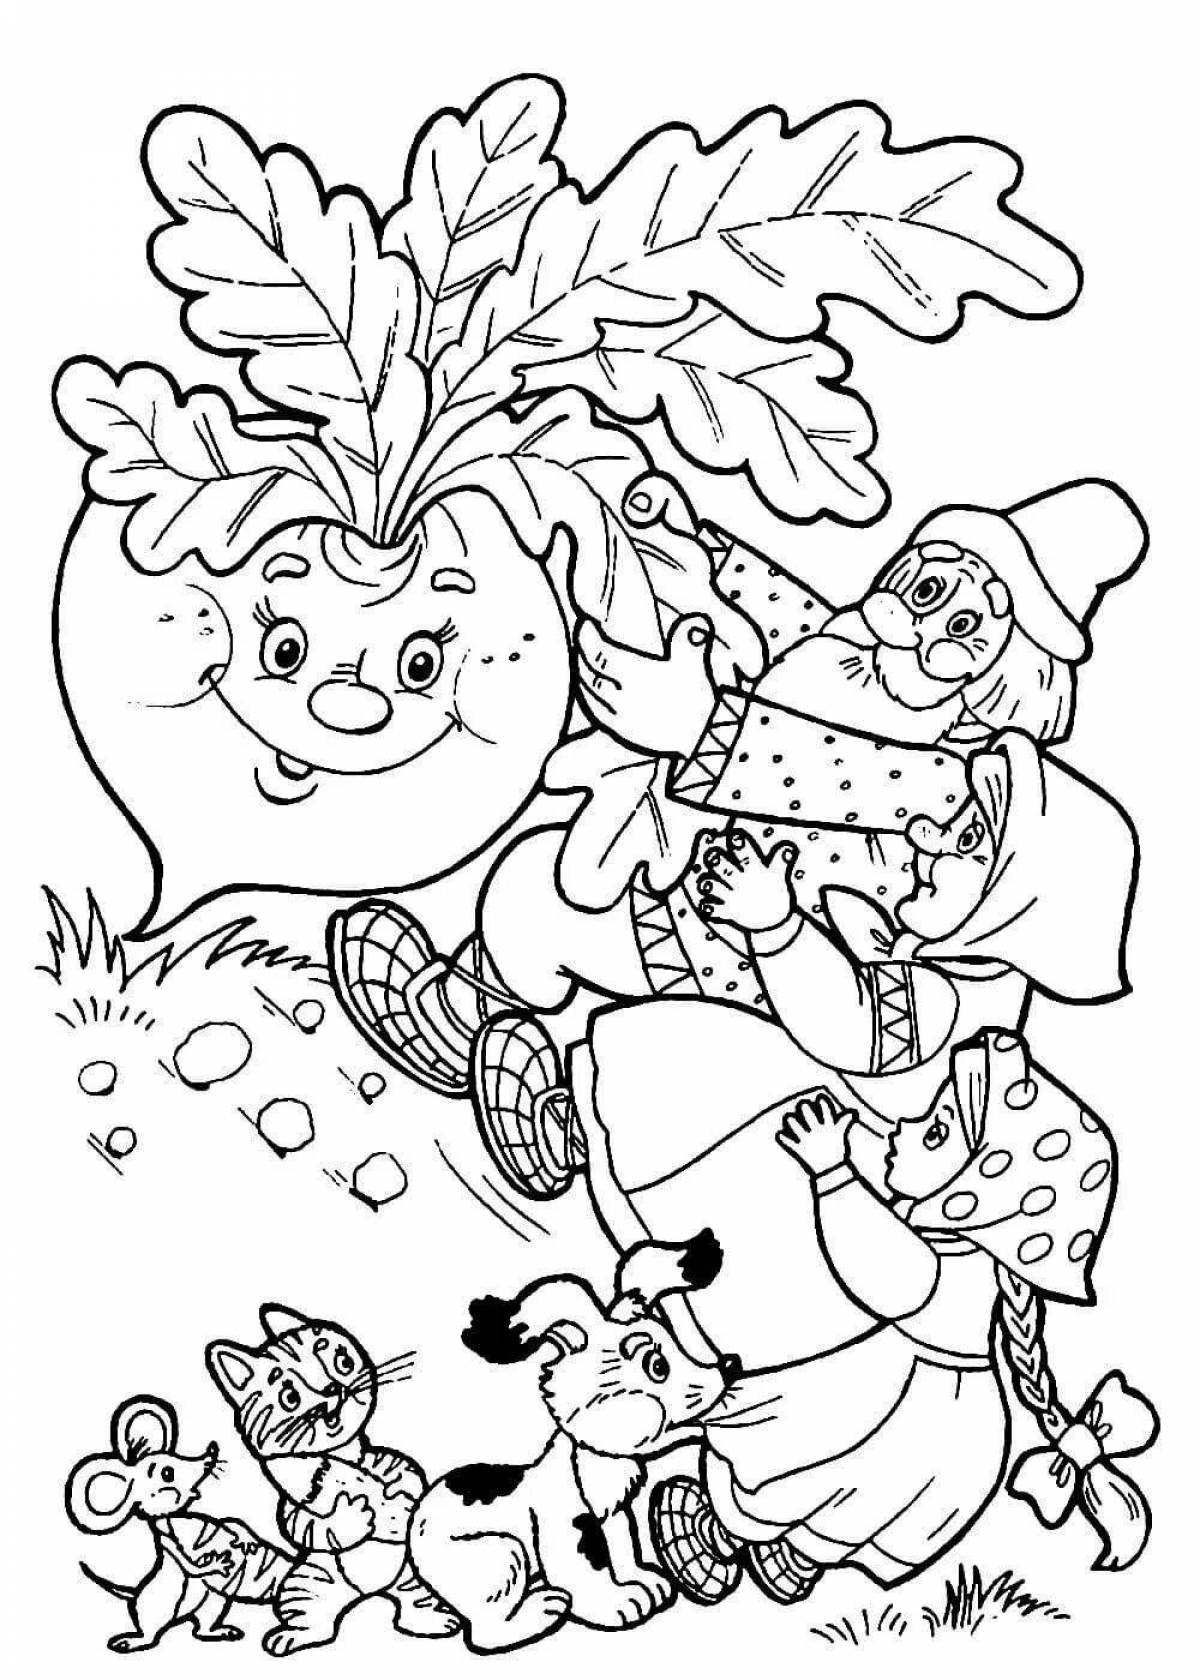 Whimsical fairy tale coloring book for preschoolers